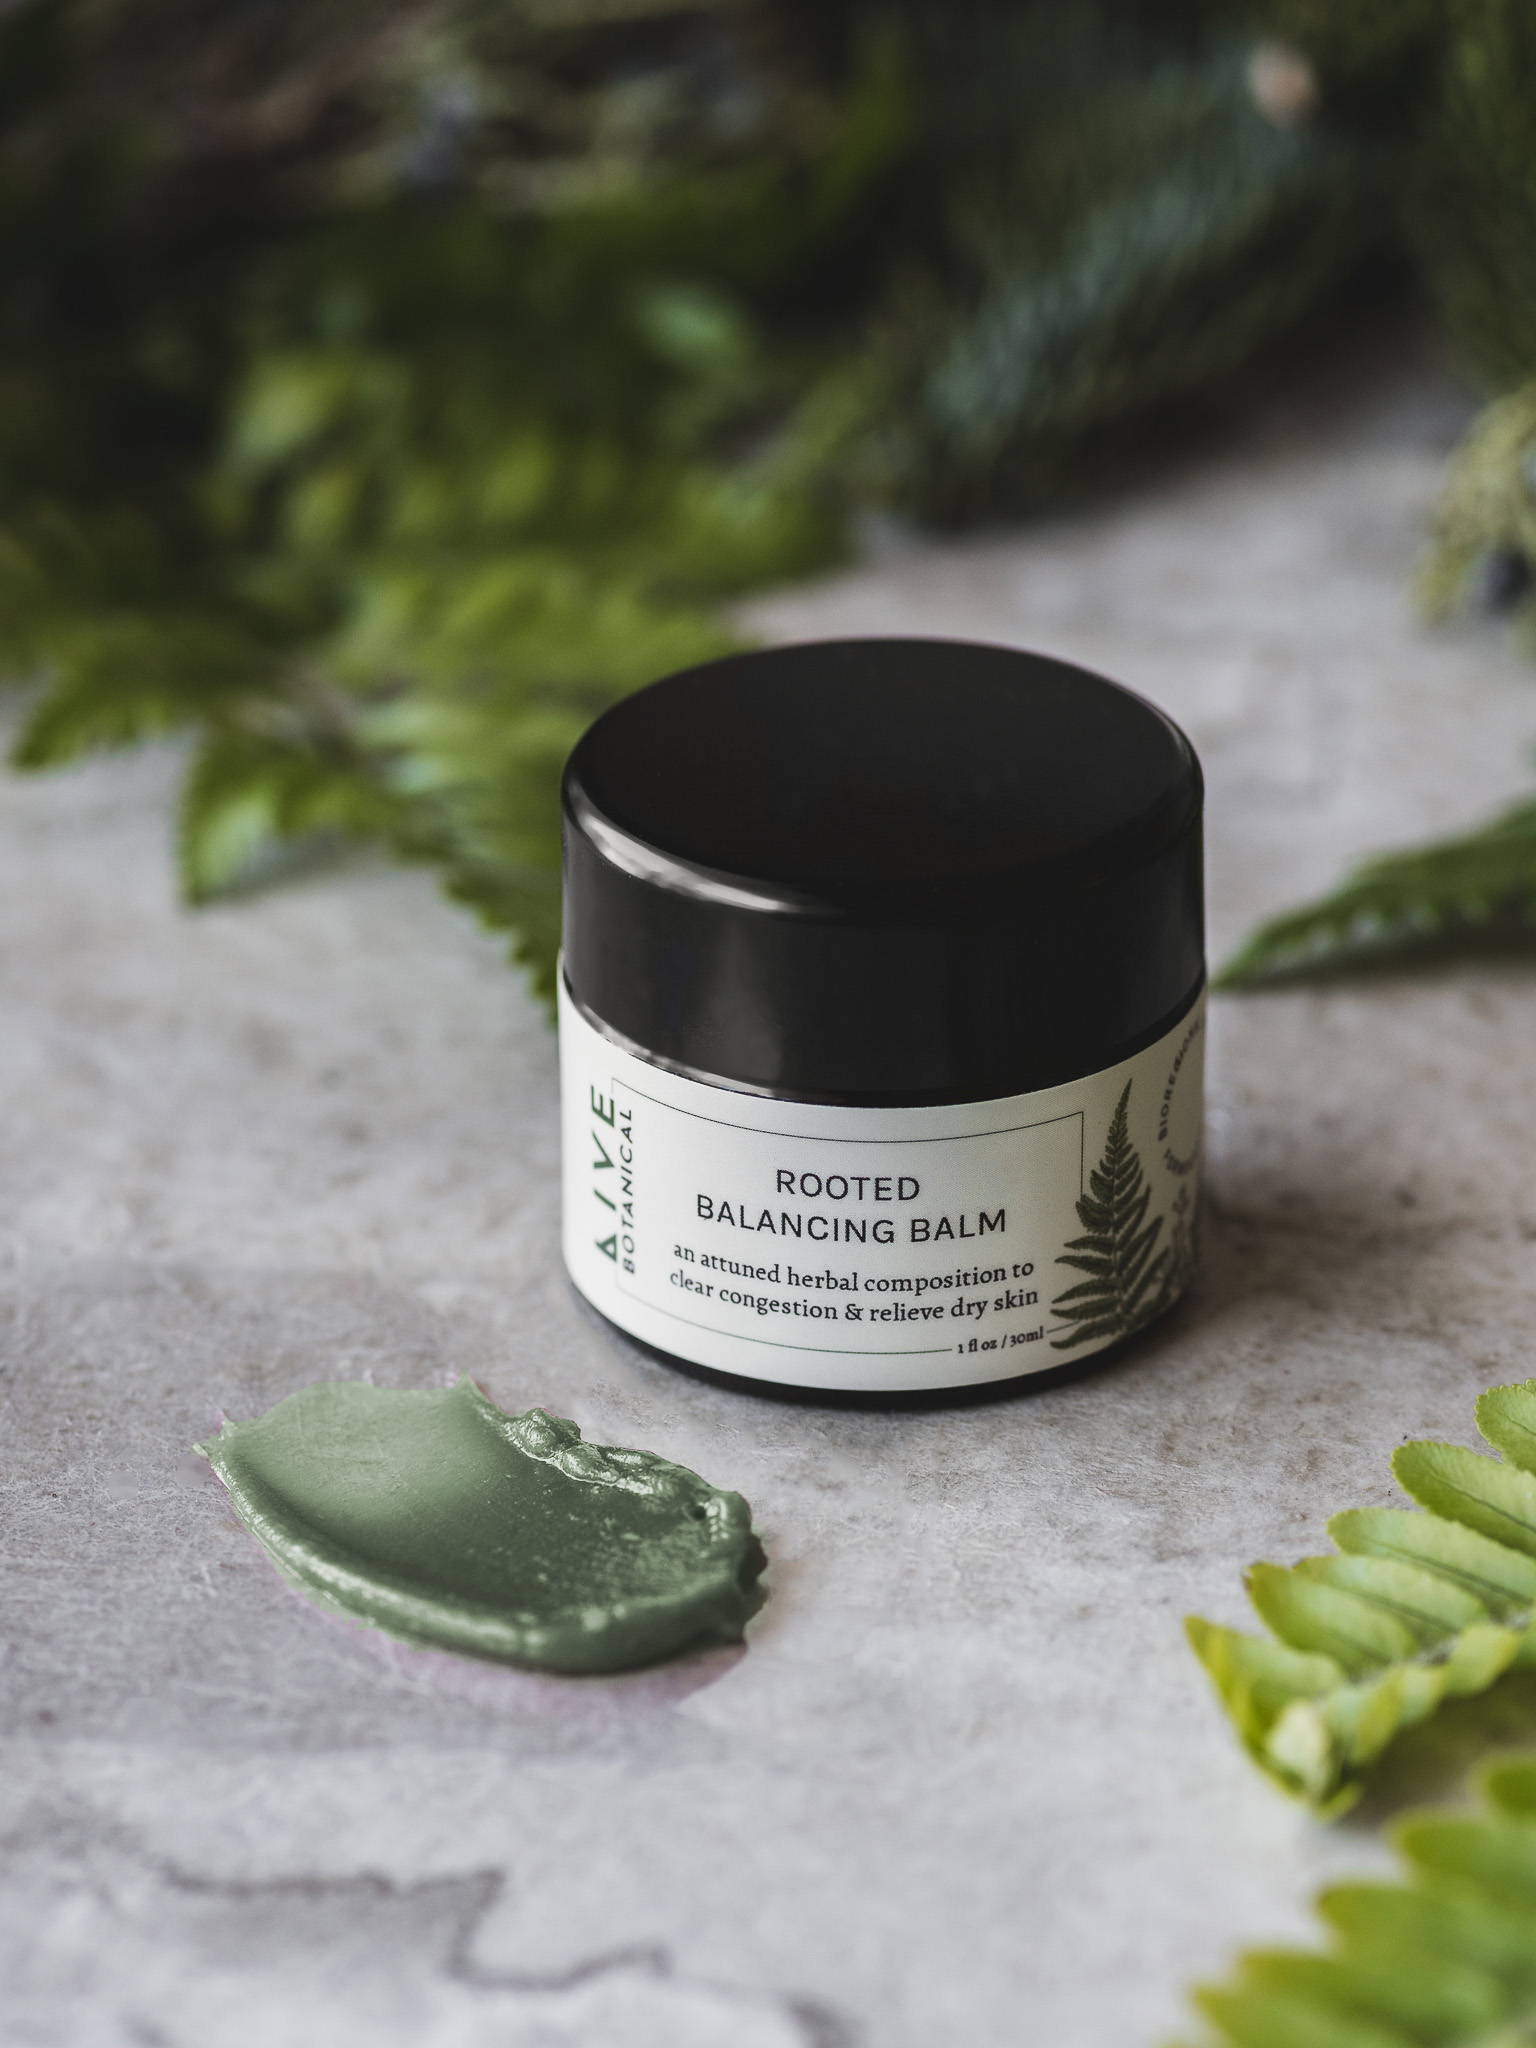 Skin Repair Balm with jar lid opened revealing a golden, soft textured balm